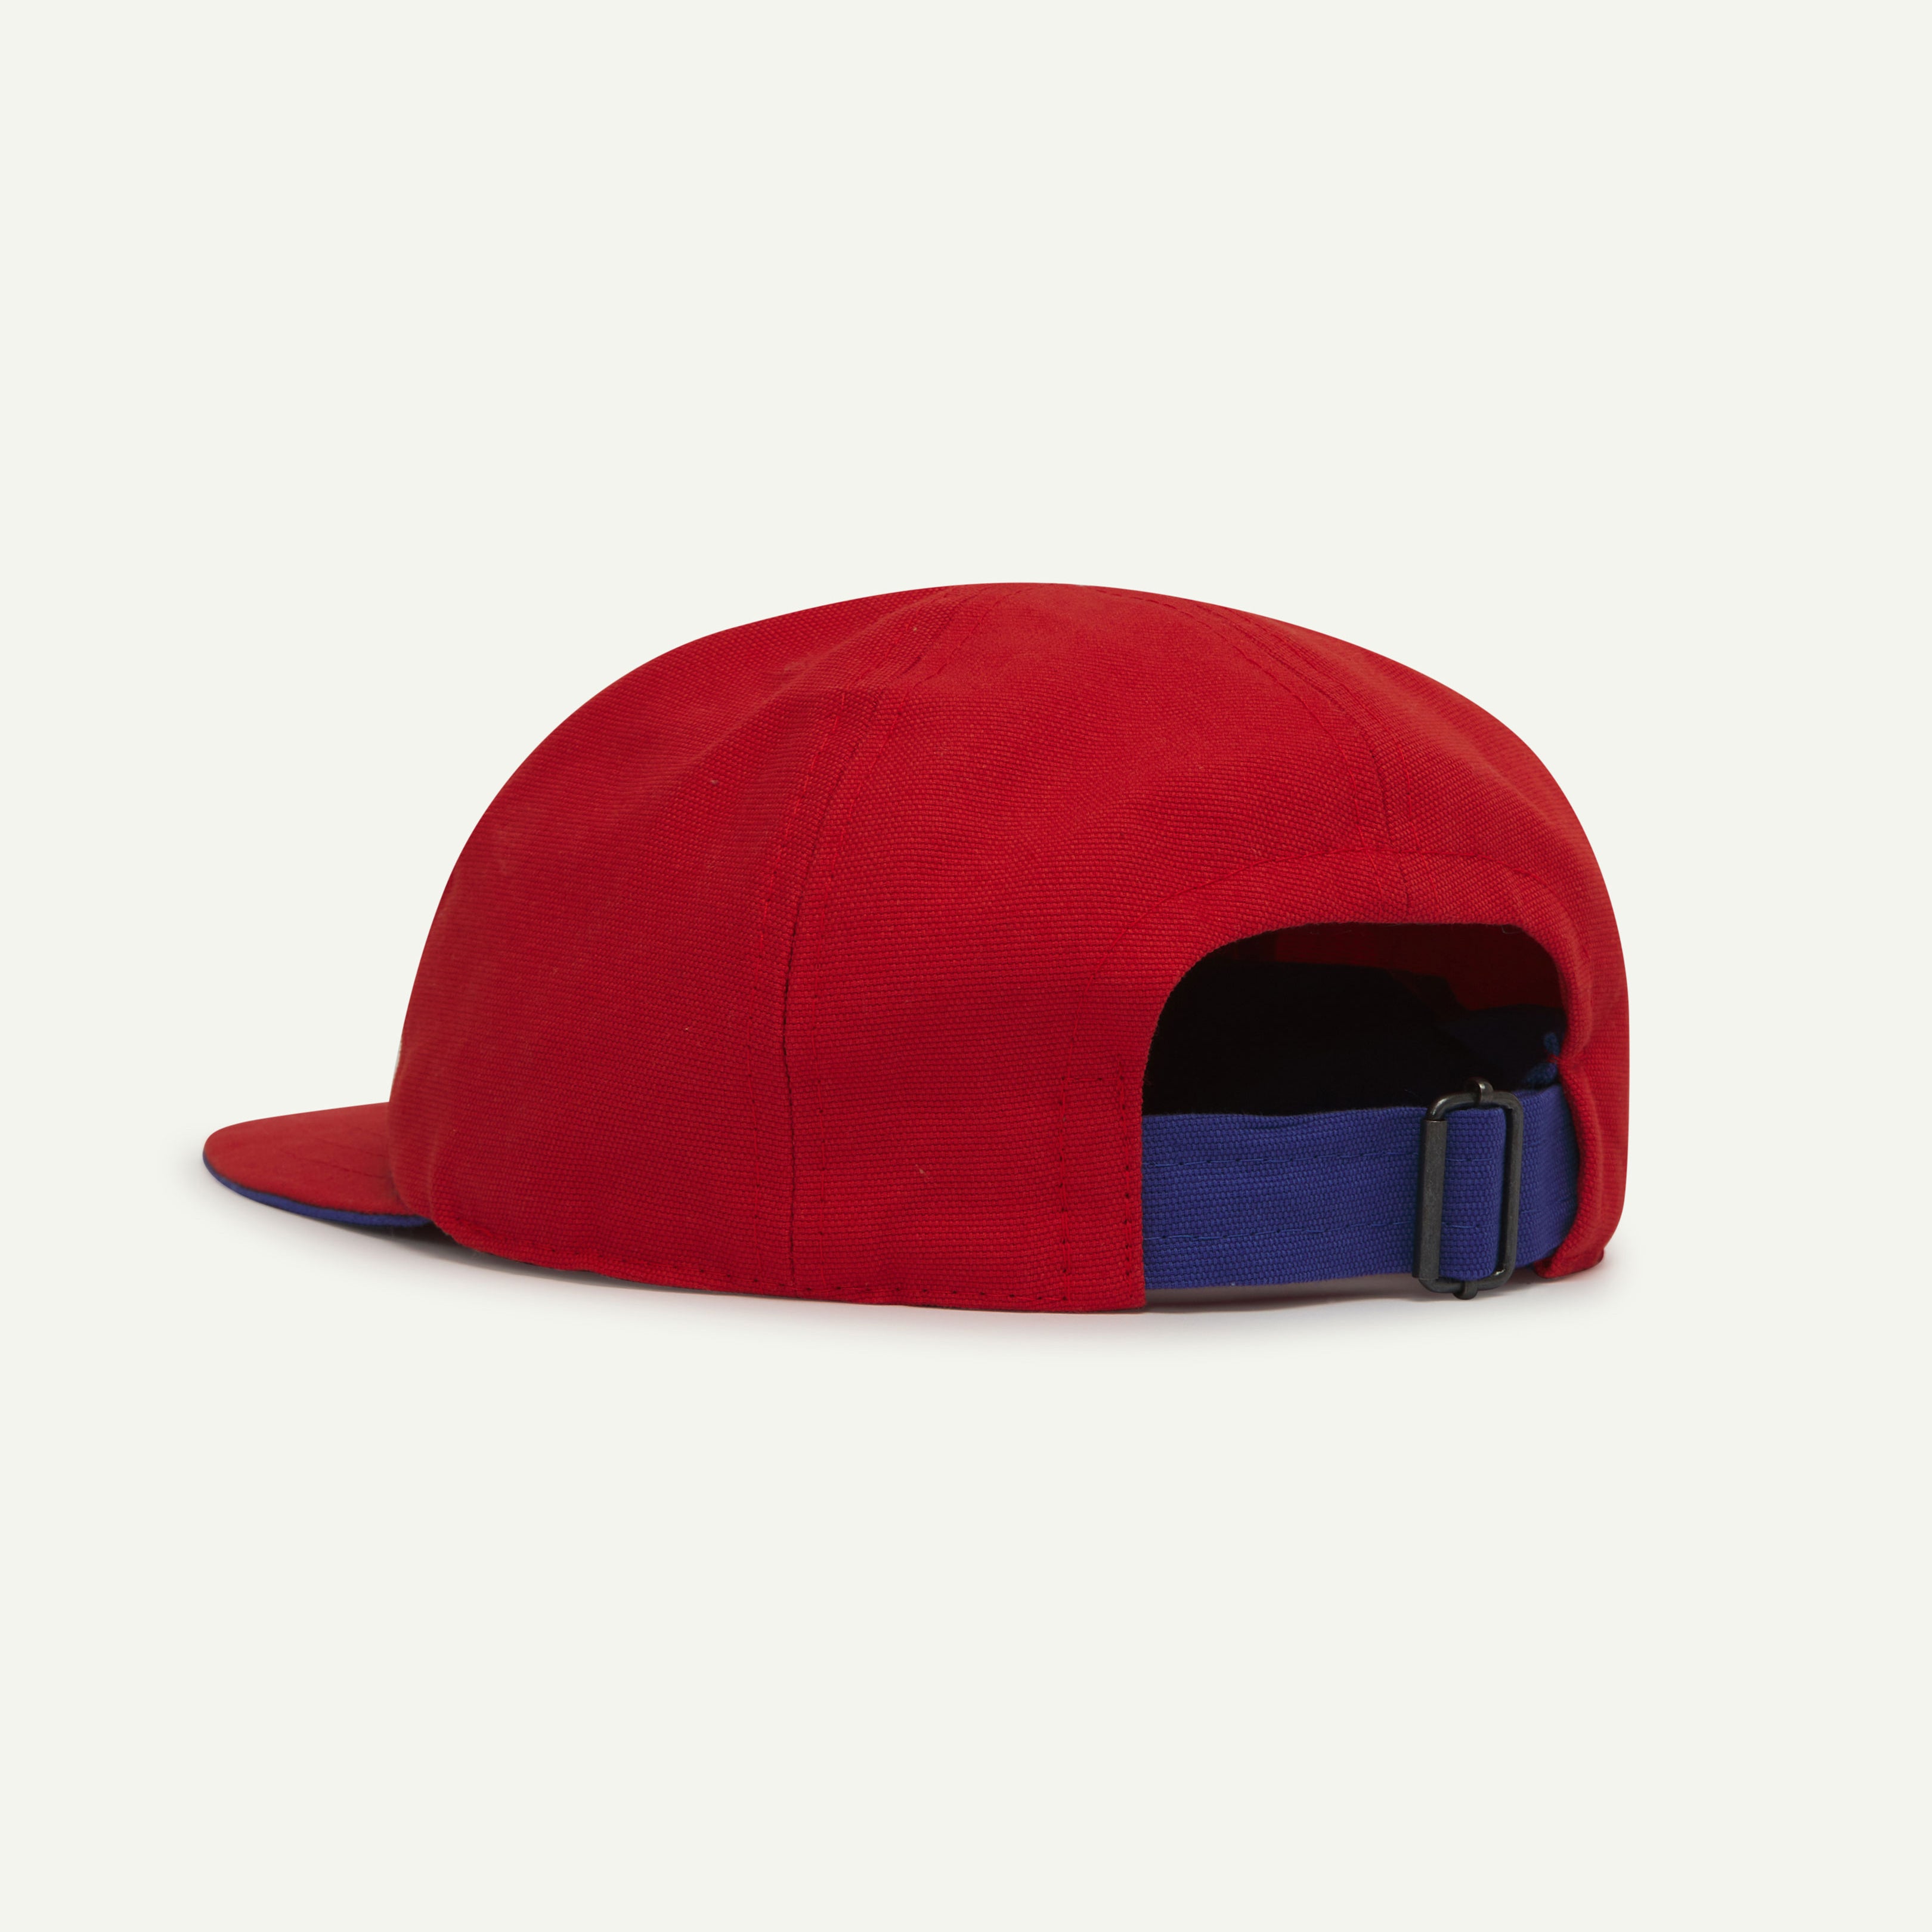 Angled back view of Uskees deadstock 6-panel cap in bright red showing contrast blue adjuster loop.